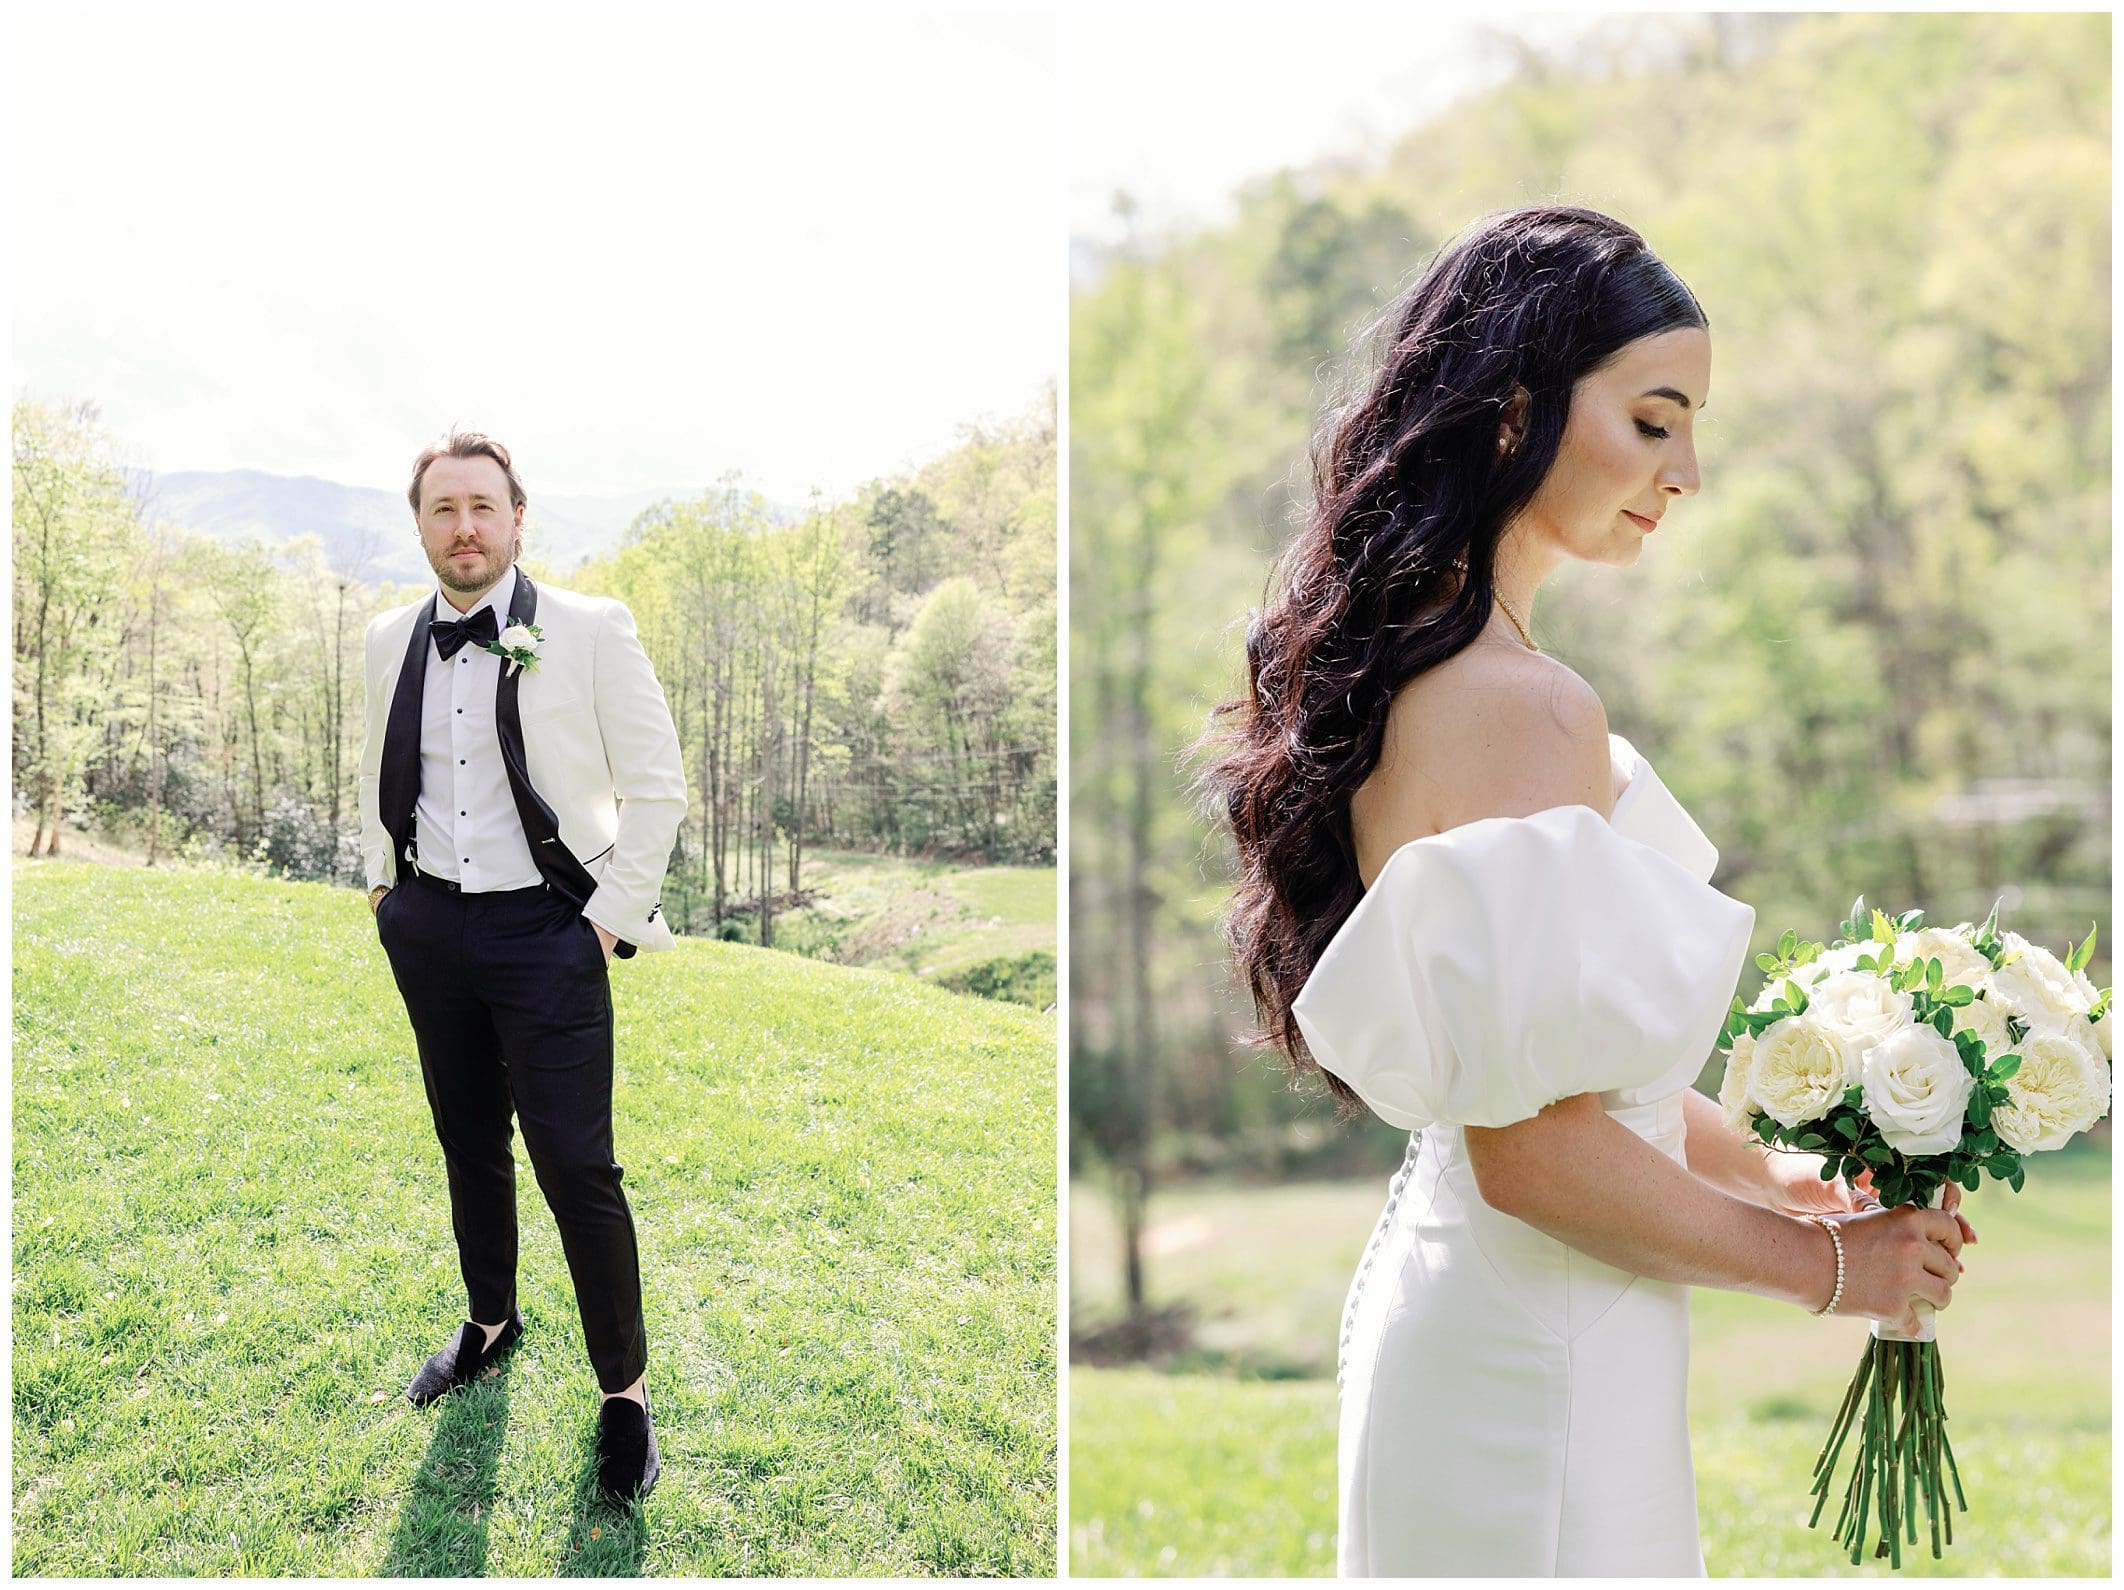 A split image of a wedding scene: on the left, a man in a tuxedo stands on grass; on the right, a woman in a white off-shoulder dress holds a bouquet, both with a scenic mountain backdrop.